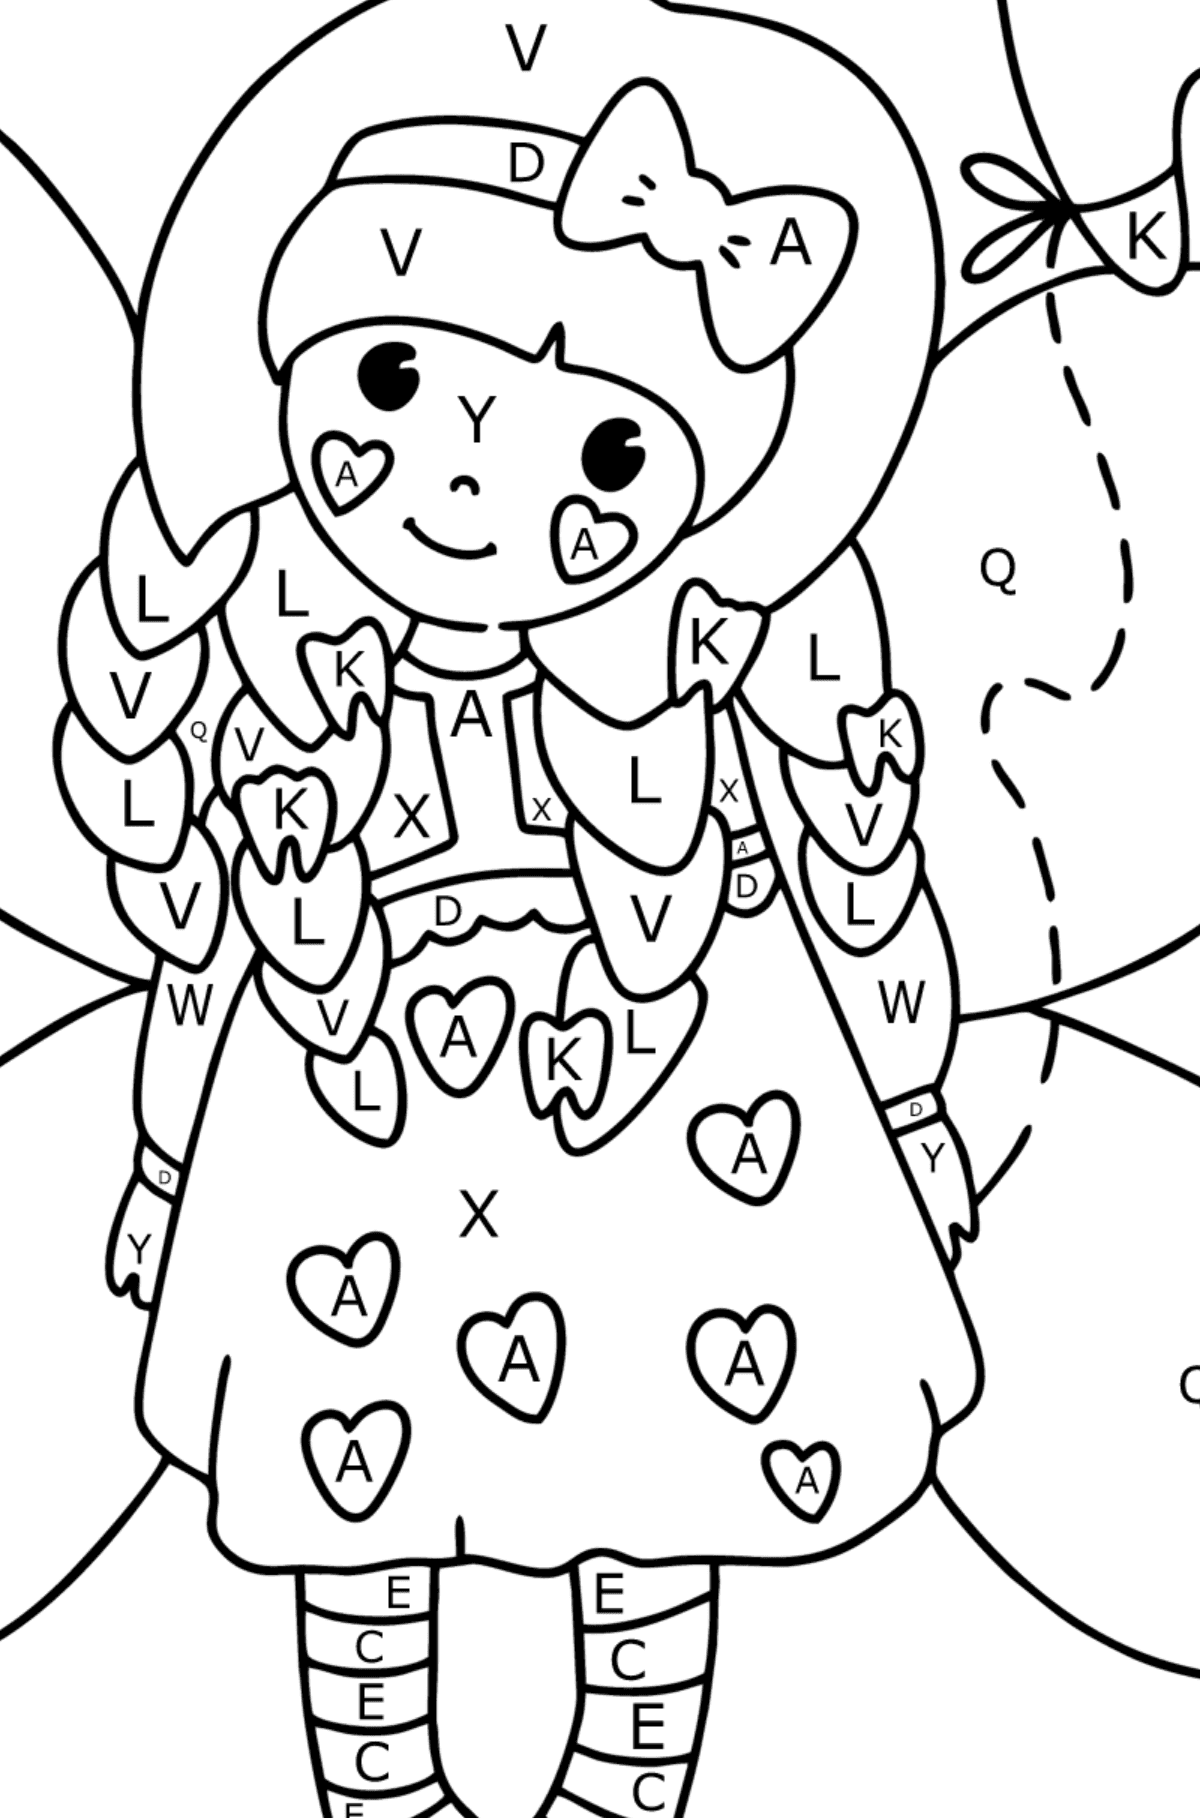 Tooth Fairy coloring page - Coloring by Letters for Kids